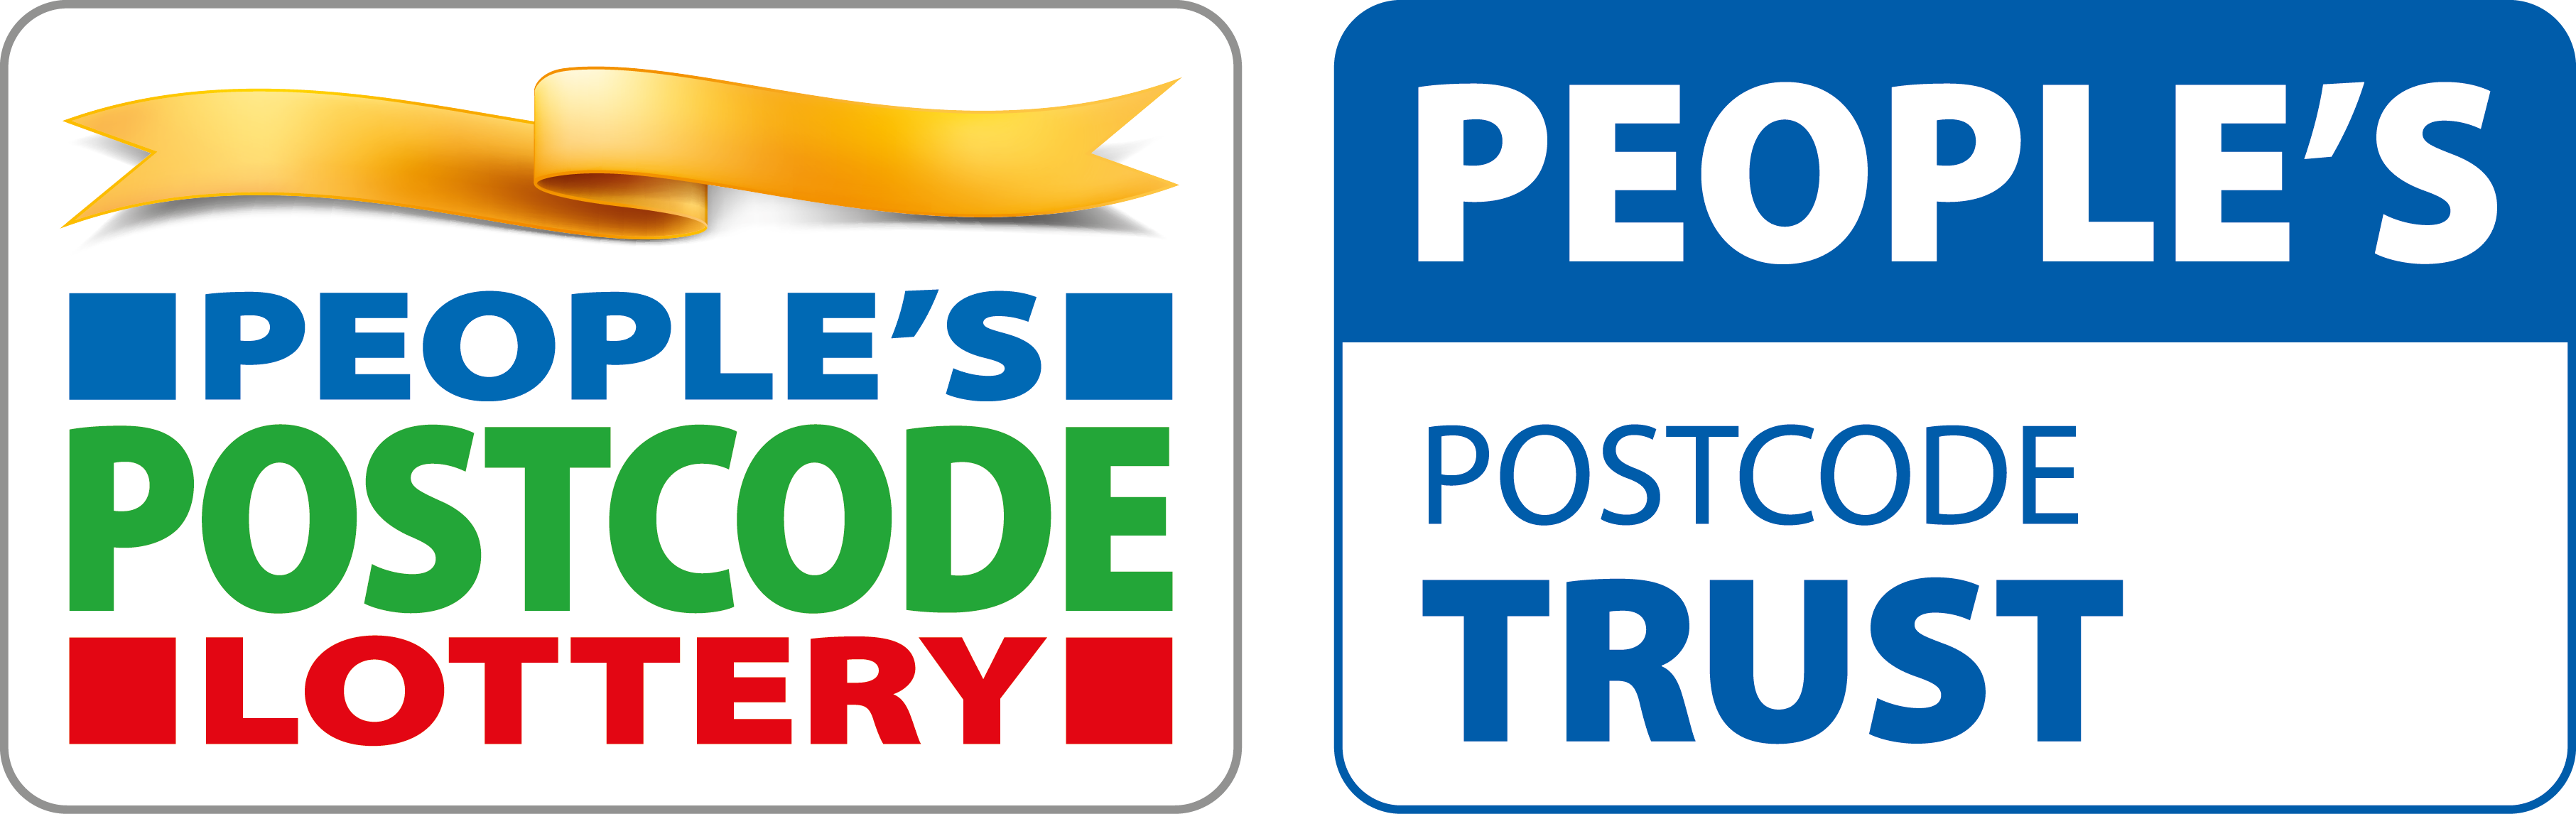 People’s Postcode Lottery Award announcement